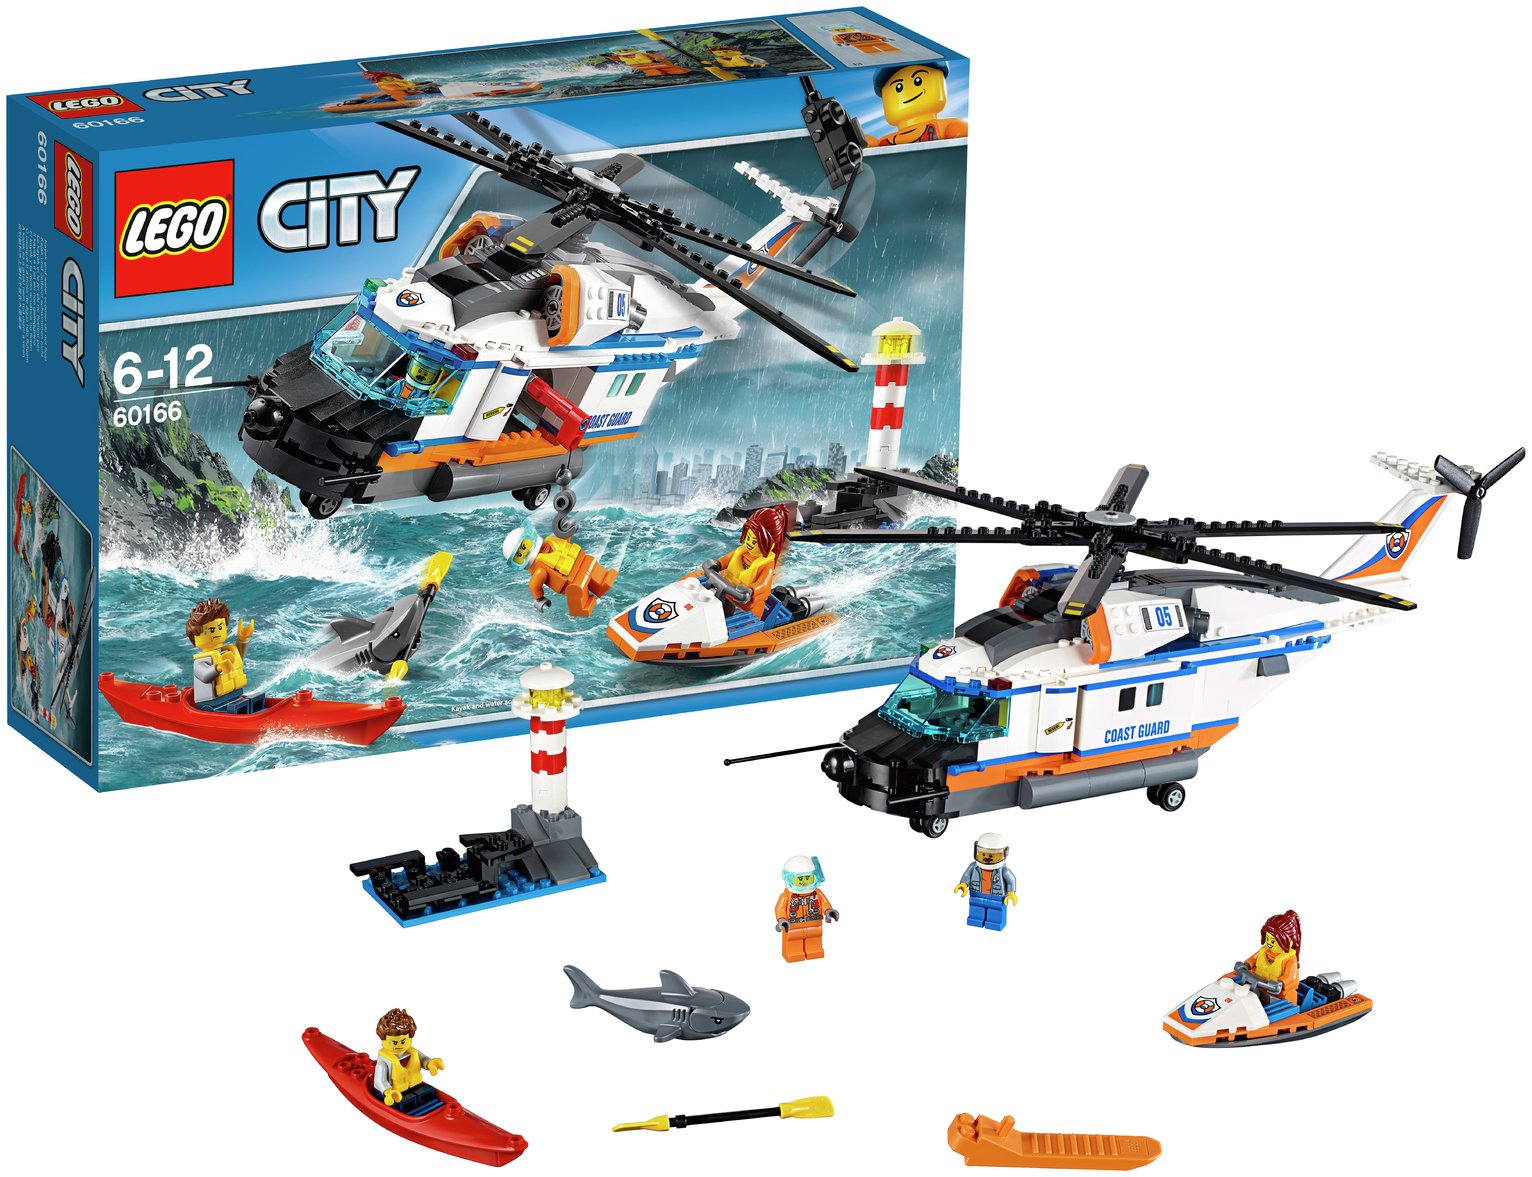 LEGO City Heavy-Duty Rescue Helicopter - 60166